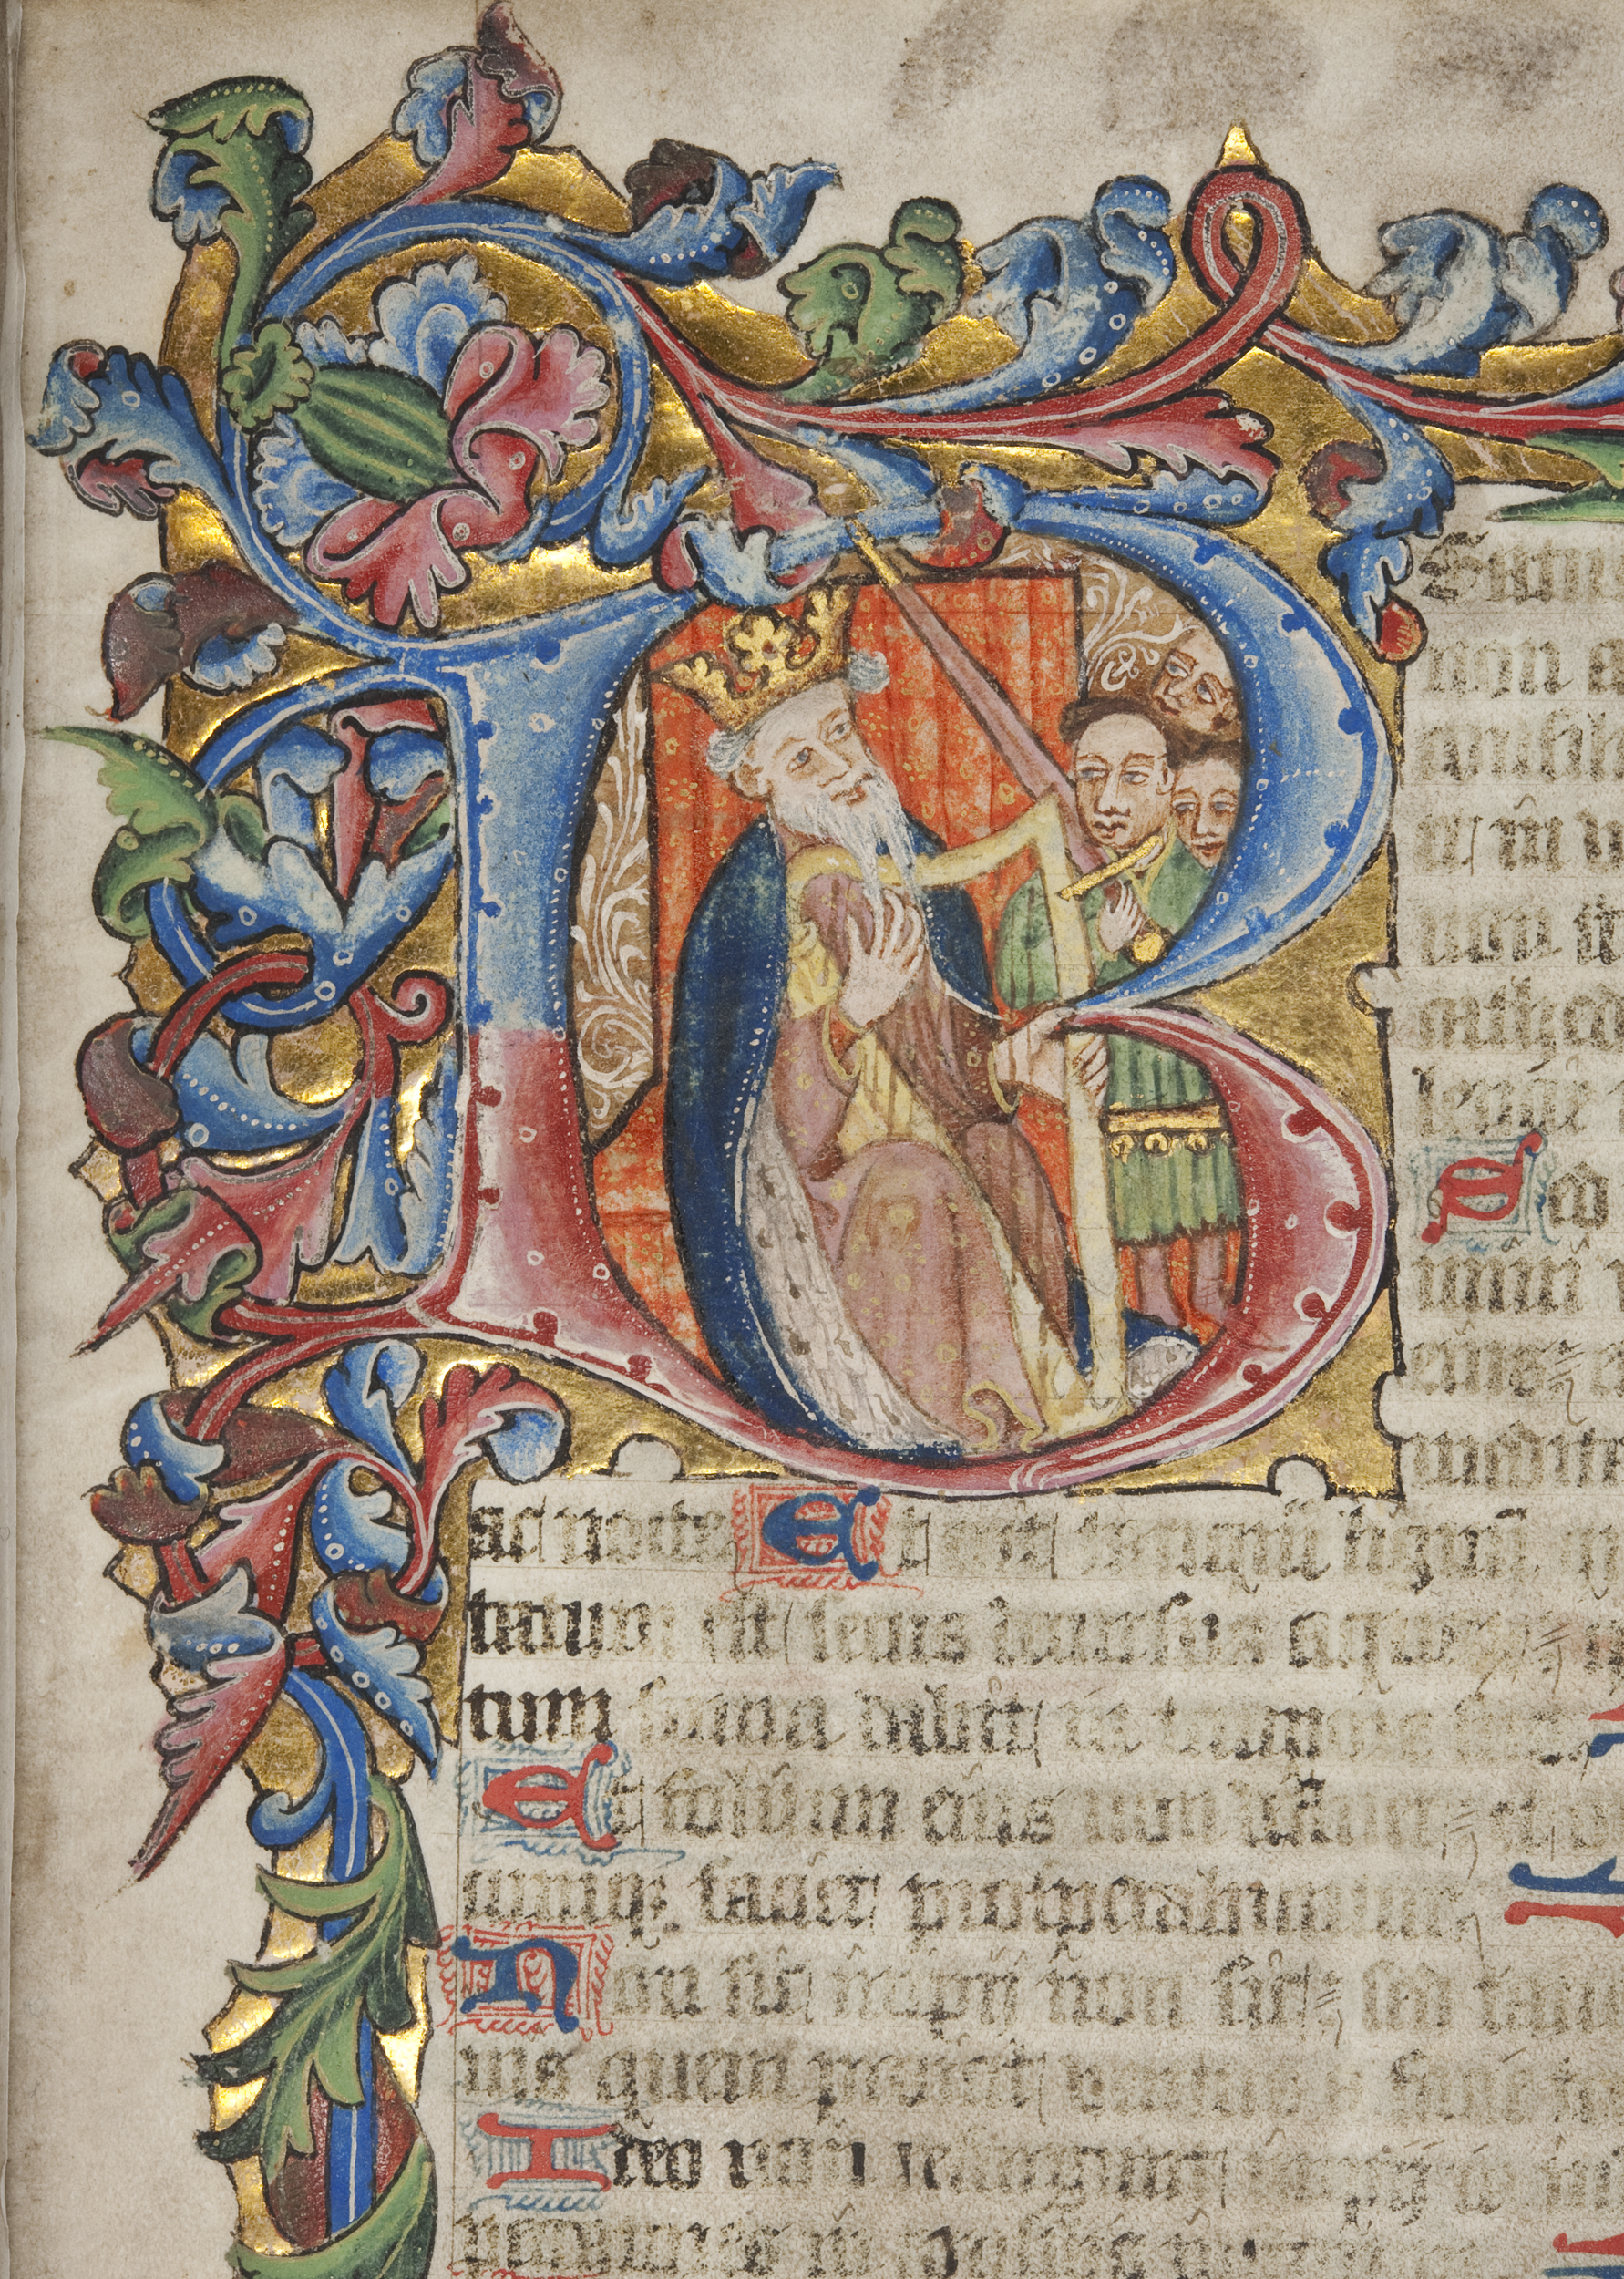 Detail of King David depicted within an illuminated initial 'B' from the “St Andrews Psalter” (St Andrews msBX2033.A00)